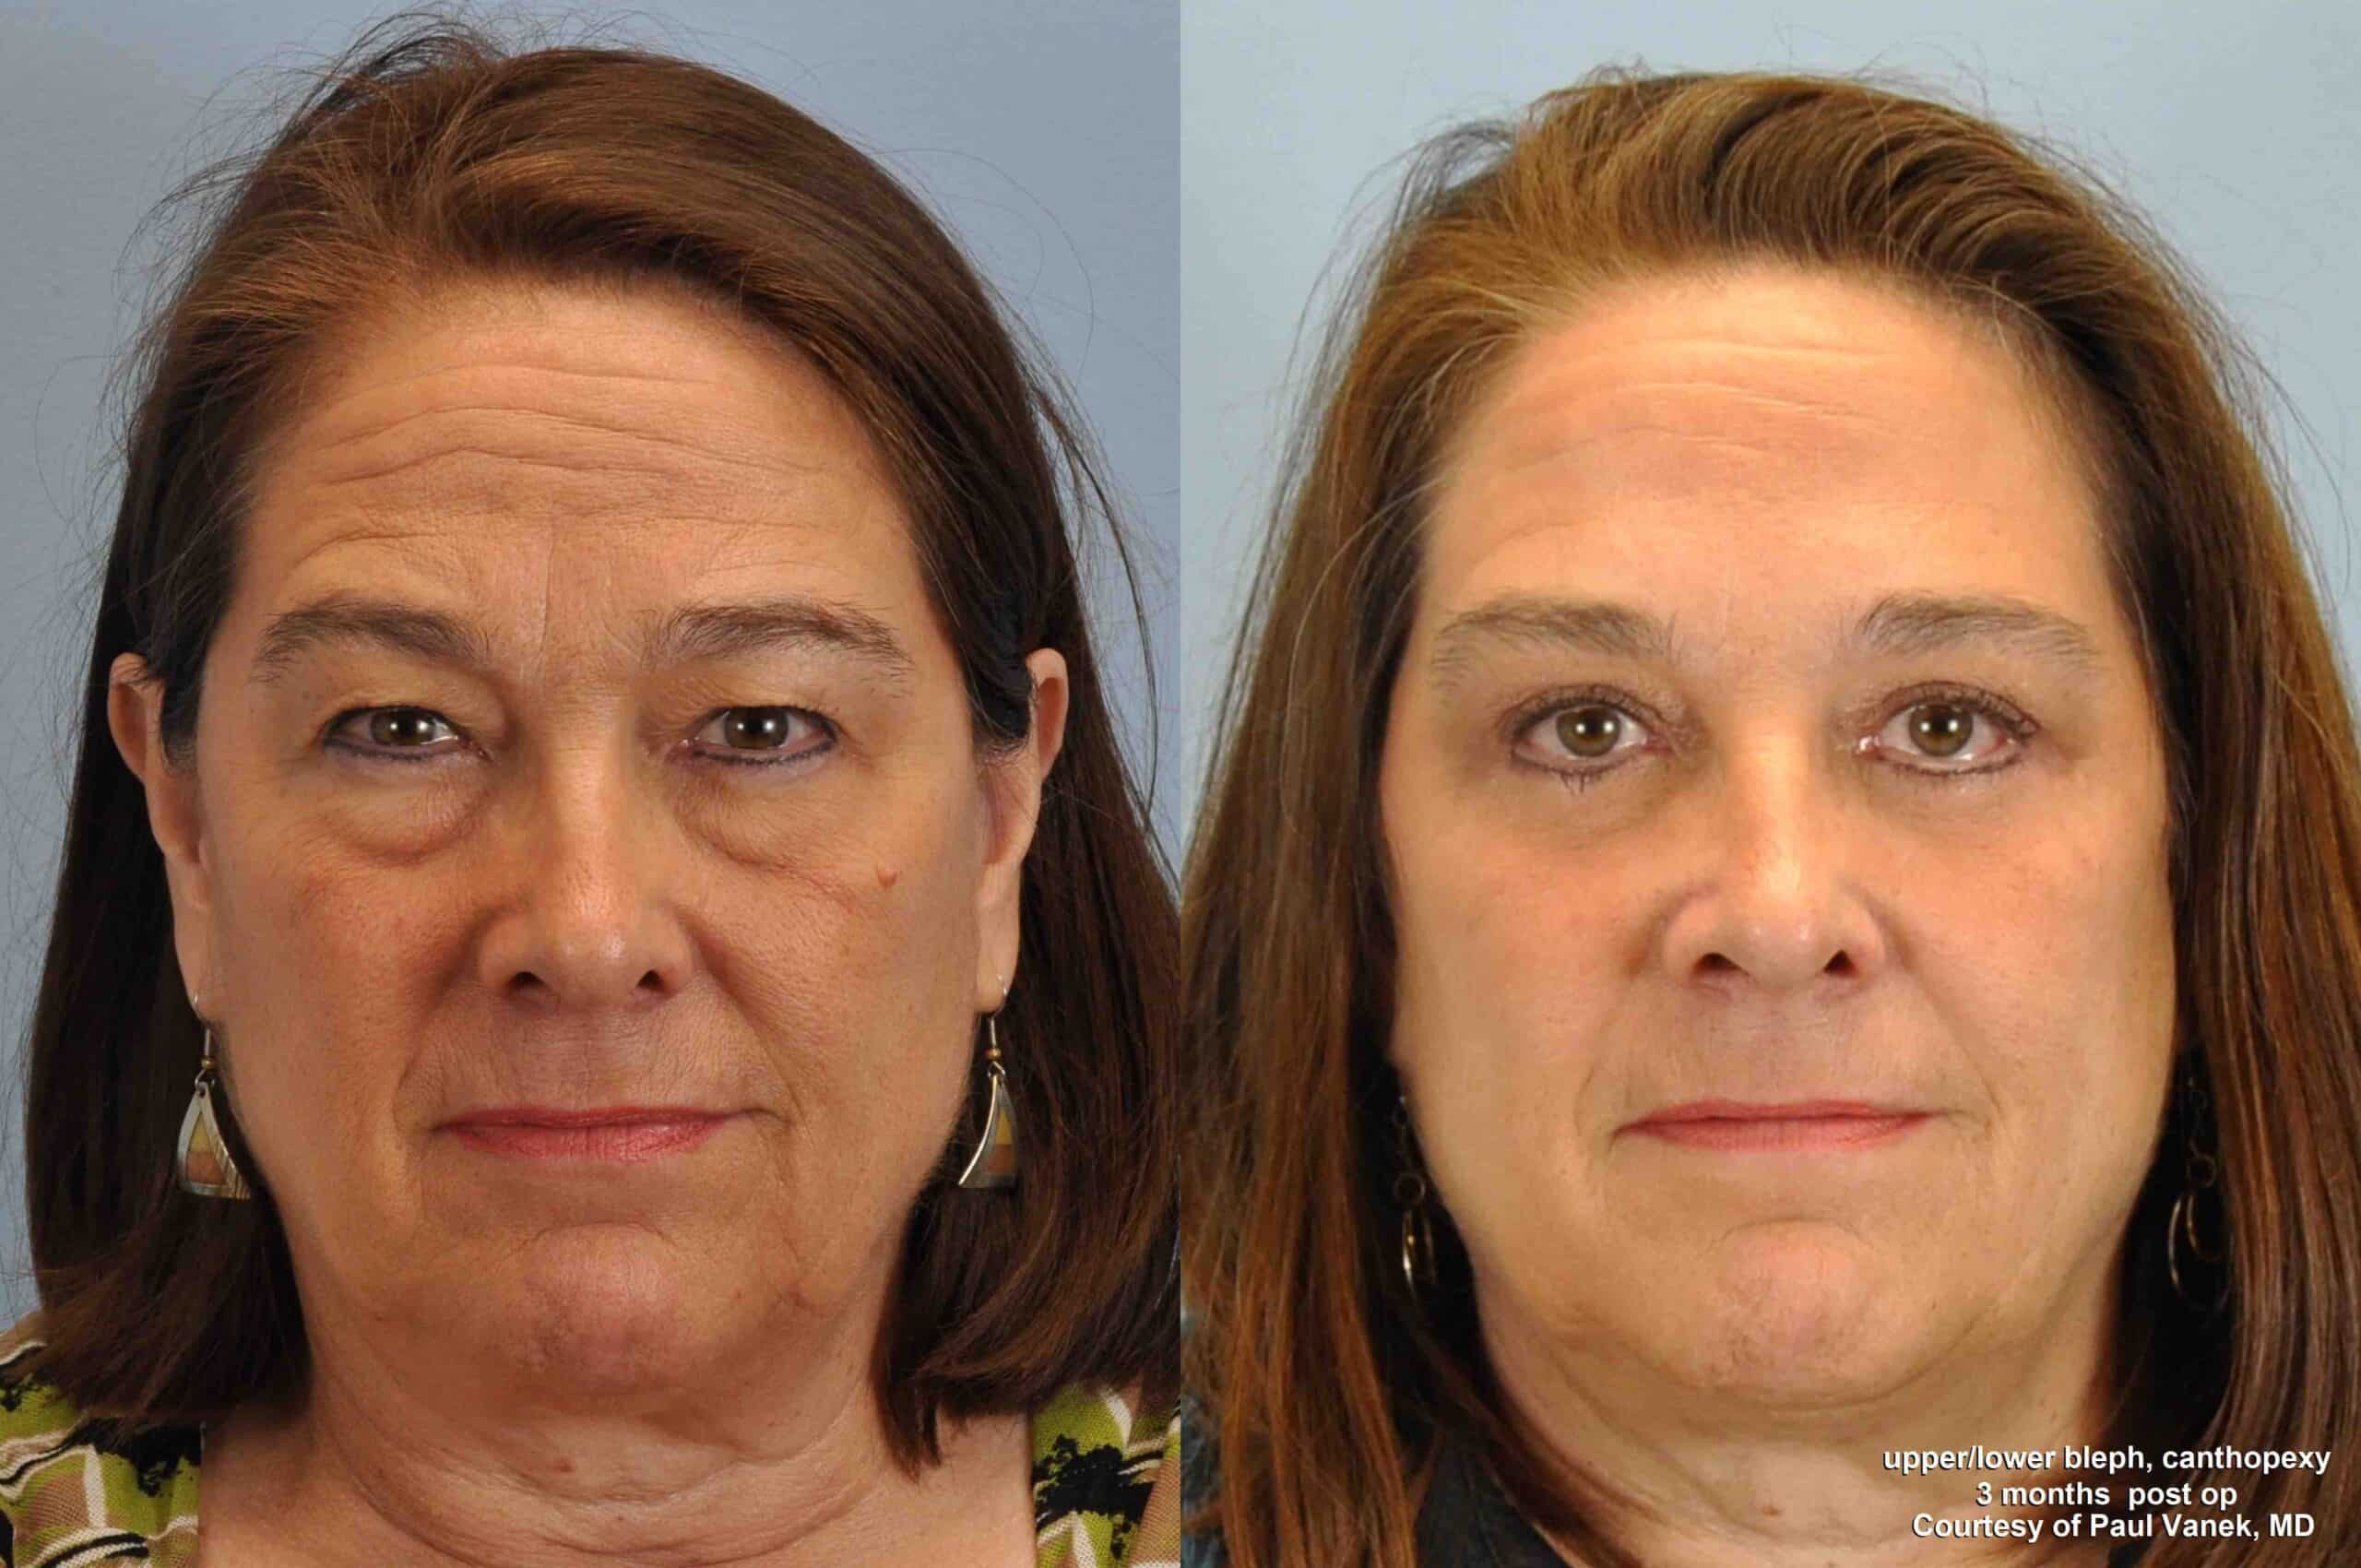 Before and after, 2 mo post op from Upper and Lower Blepharoplasty, Canthoplexy performed by Dr. Paul Vanek (front view)